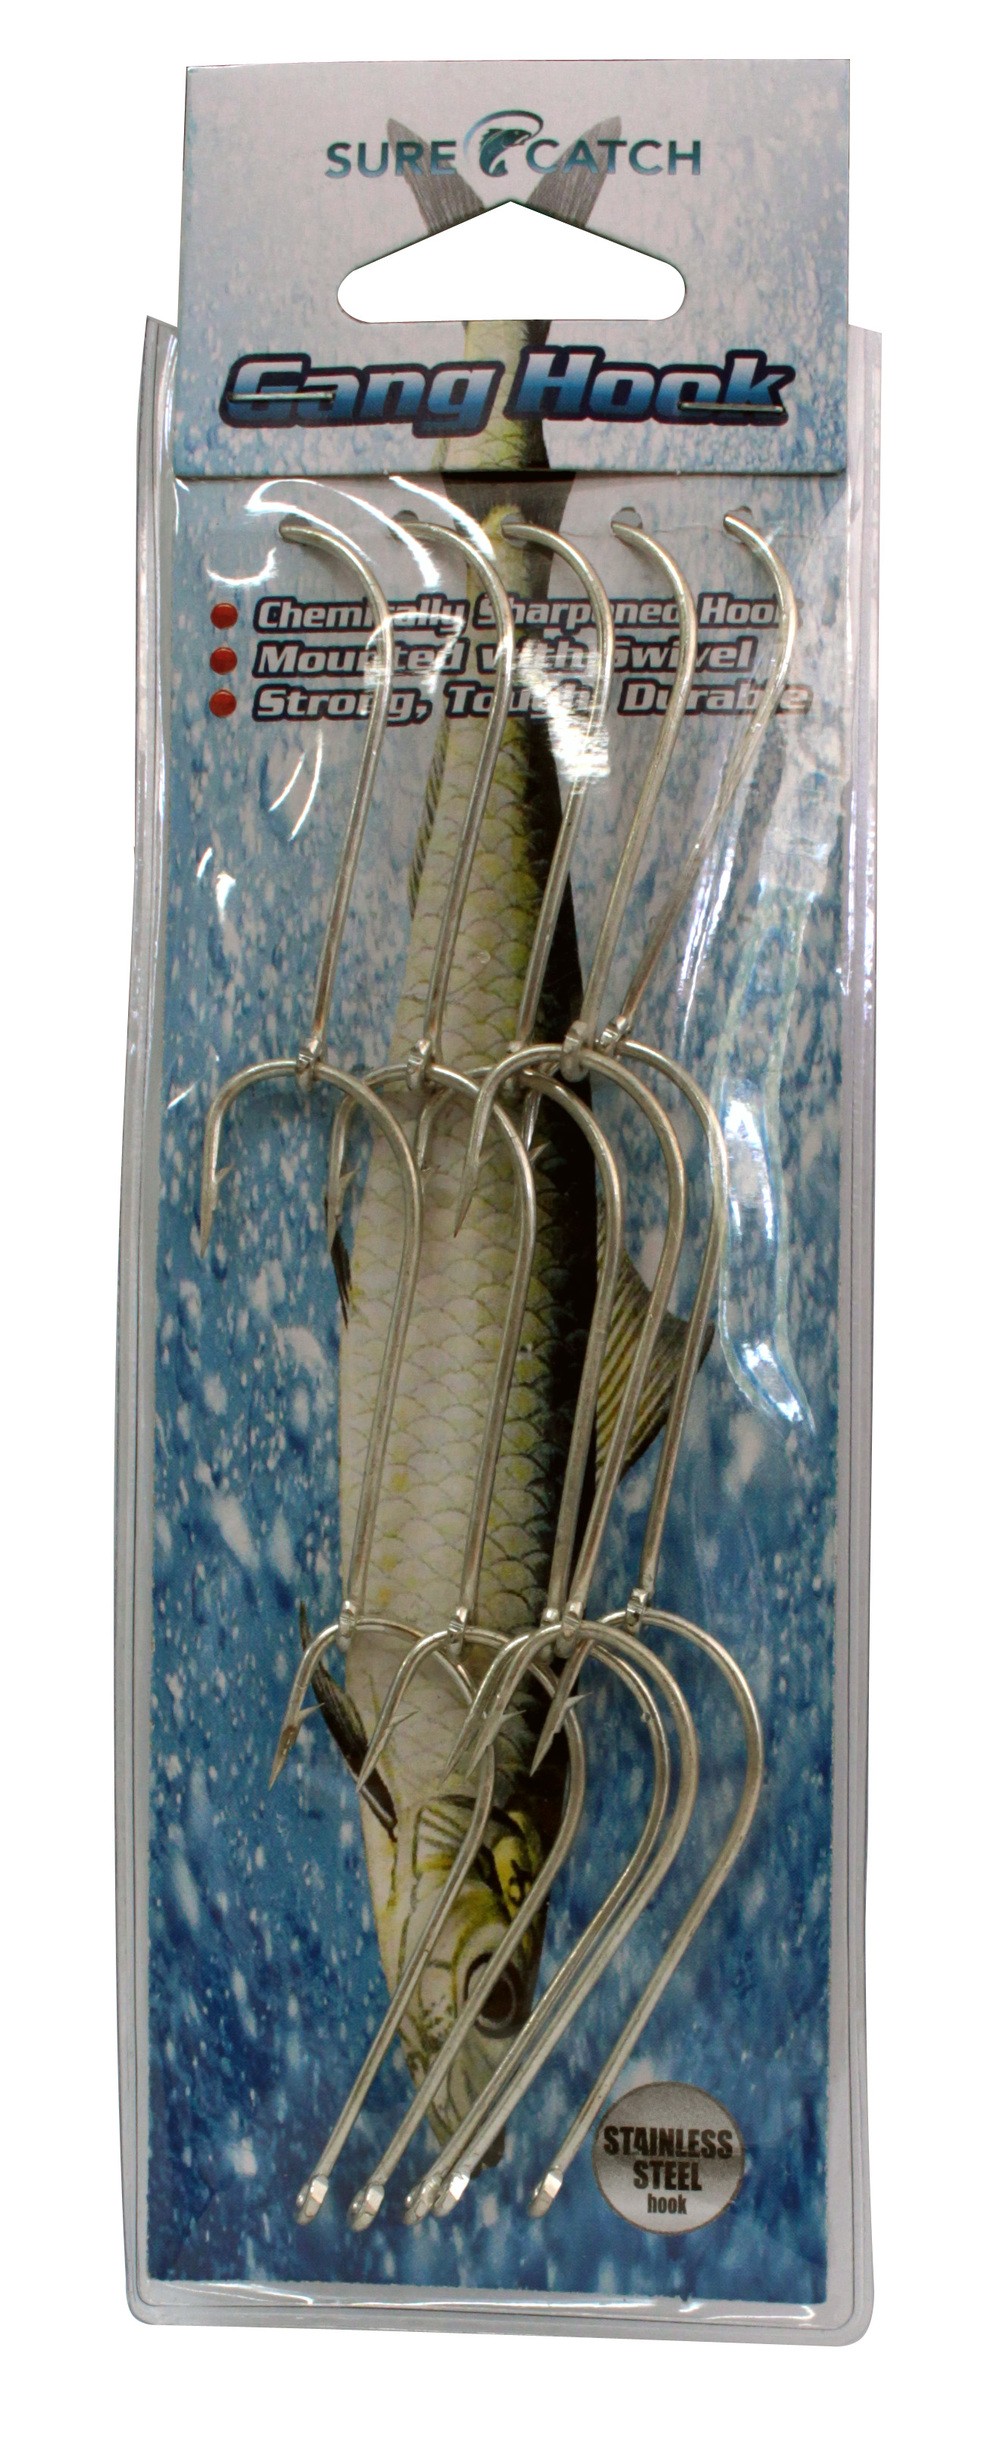 Sure Catch Chem/Sharp S/Steel Pre-rigged Ganged Hooks (Pack of 5 rigs) - Size 3/0